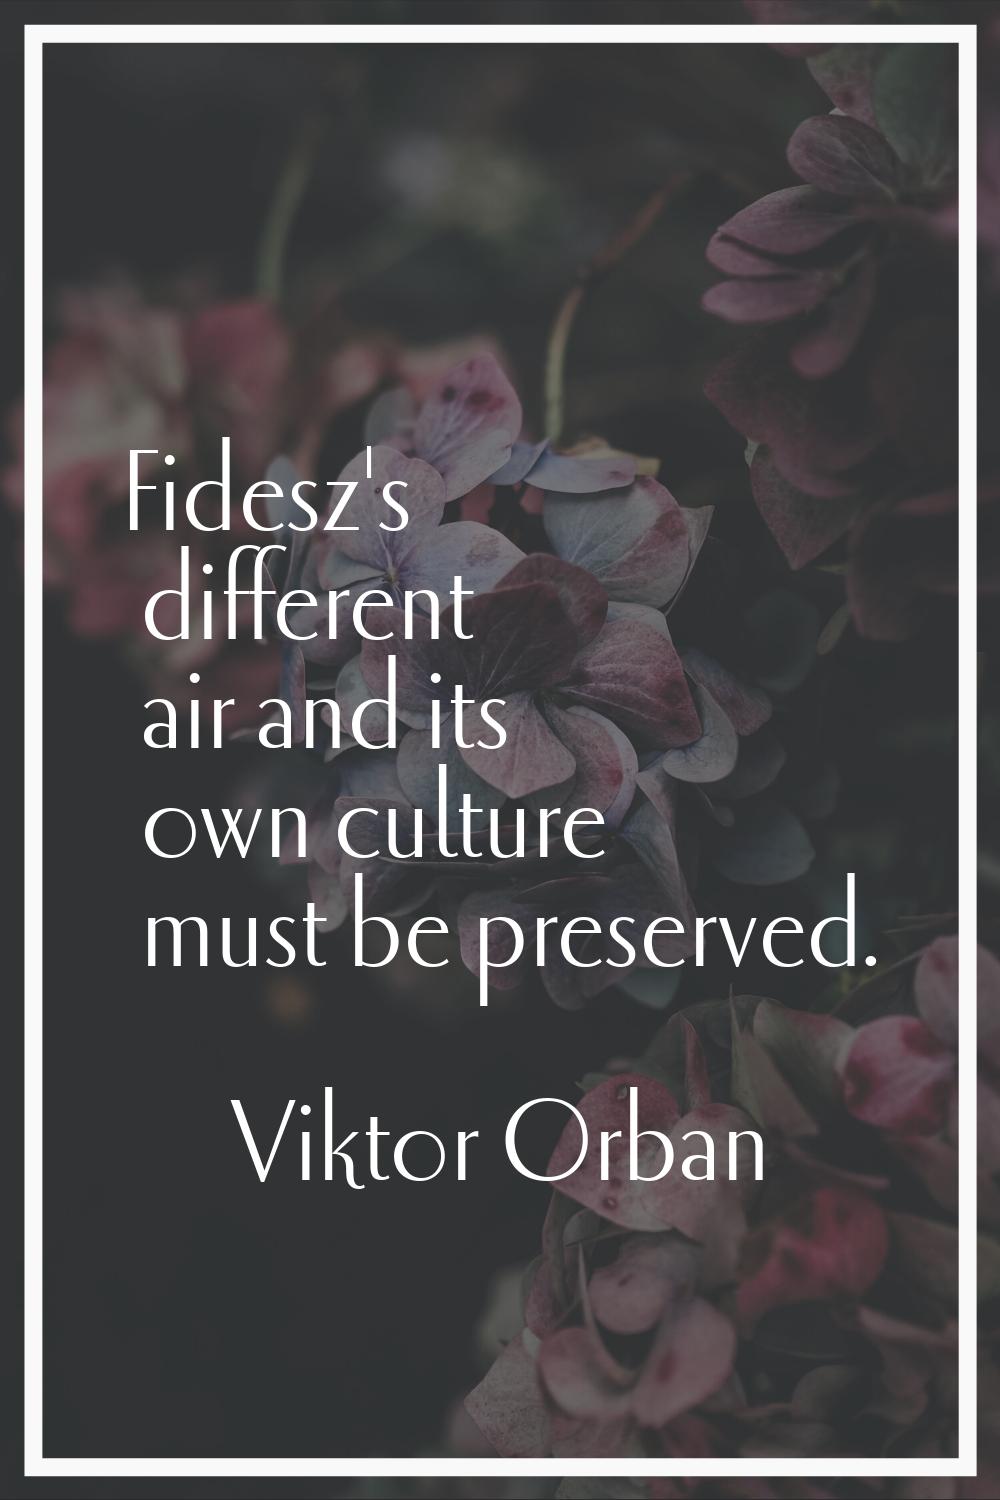 Fidesz's different air and its own culture must be preserved.